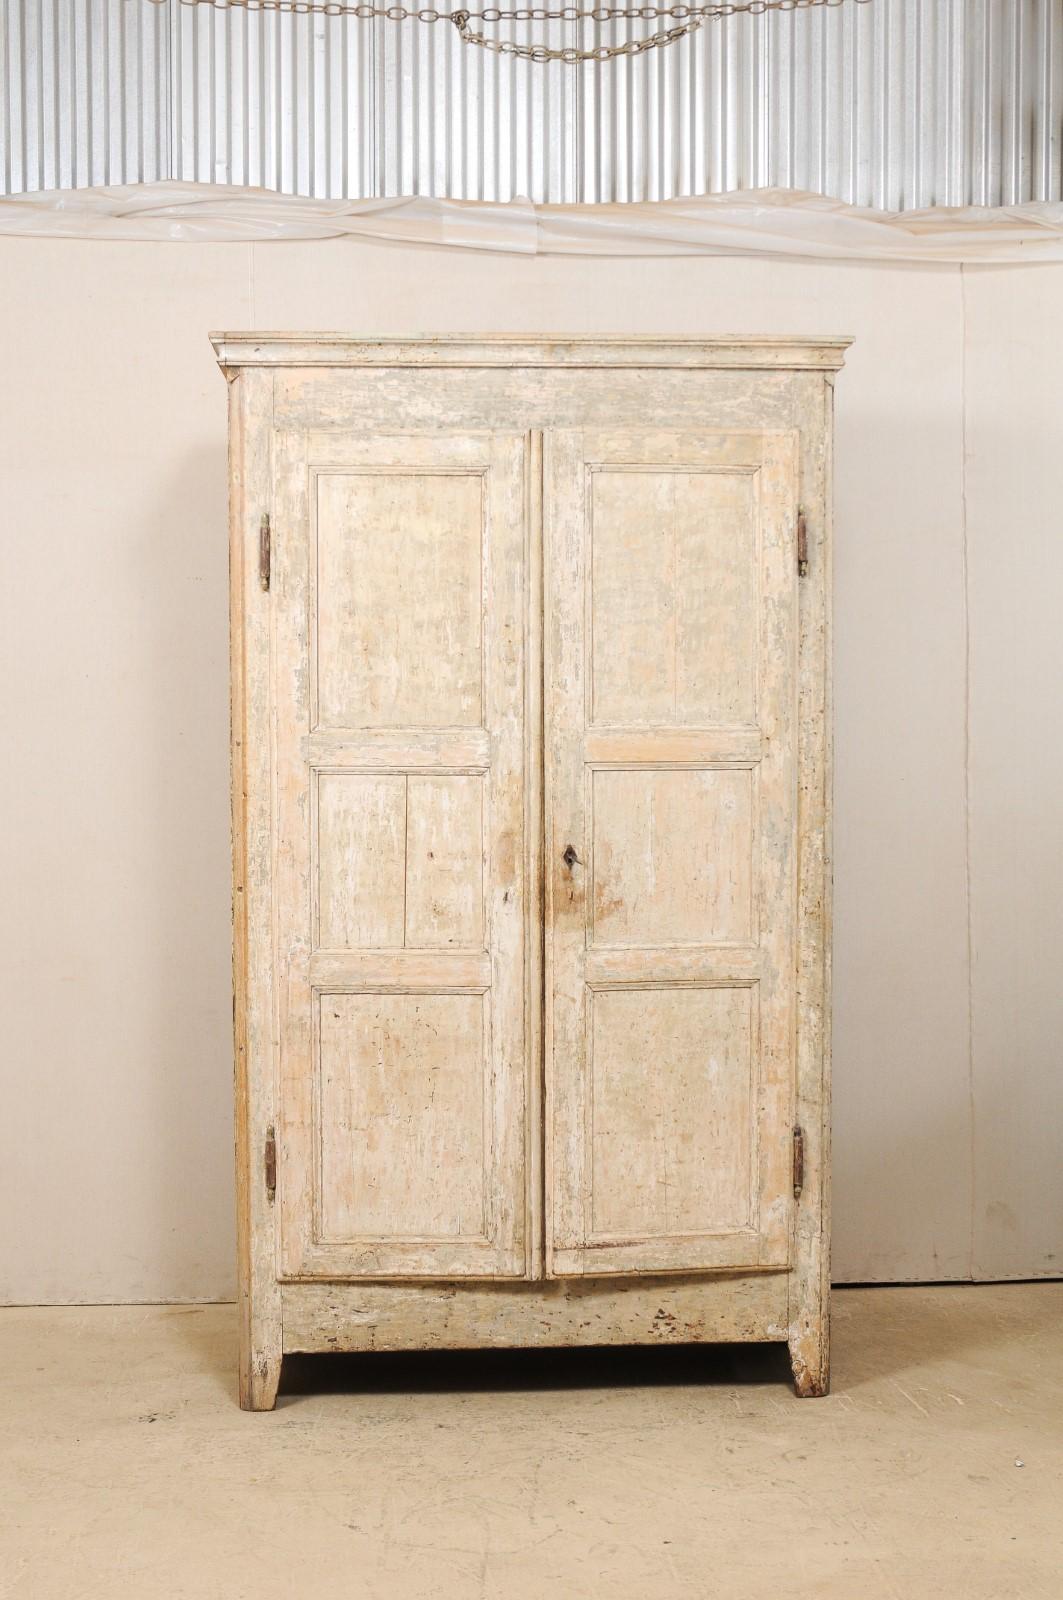 A French painted wood armoire storage cabinet from the early 19th century. This tall antique cabinet from the South of France features a molded cornice, a pair of three-panel doors which opens to reveal shelving for plentiful storage within, and is